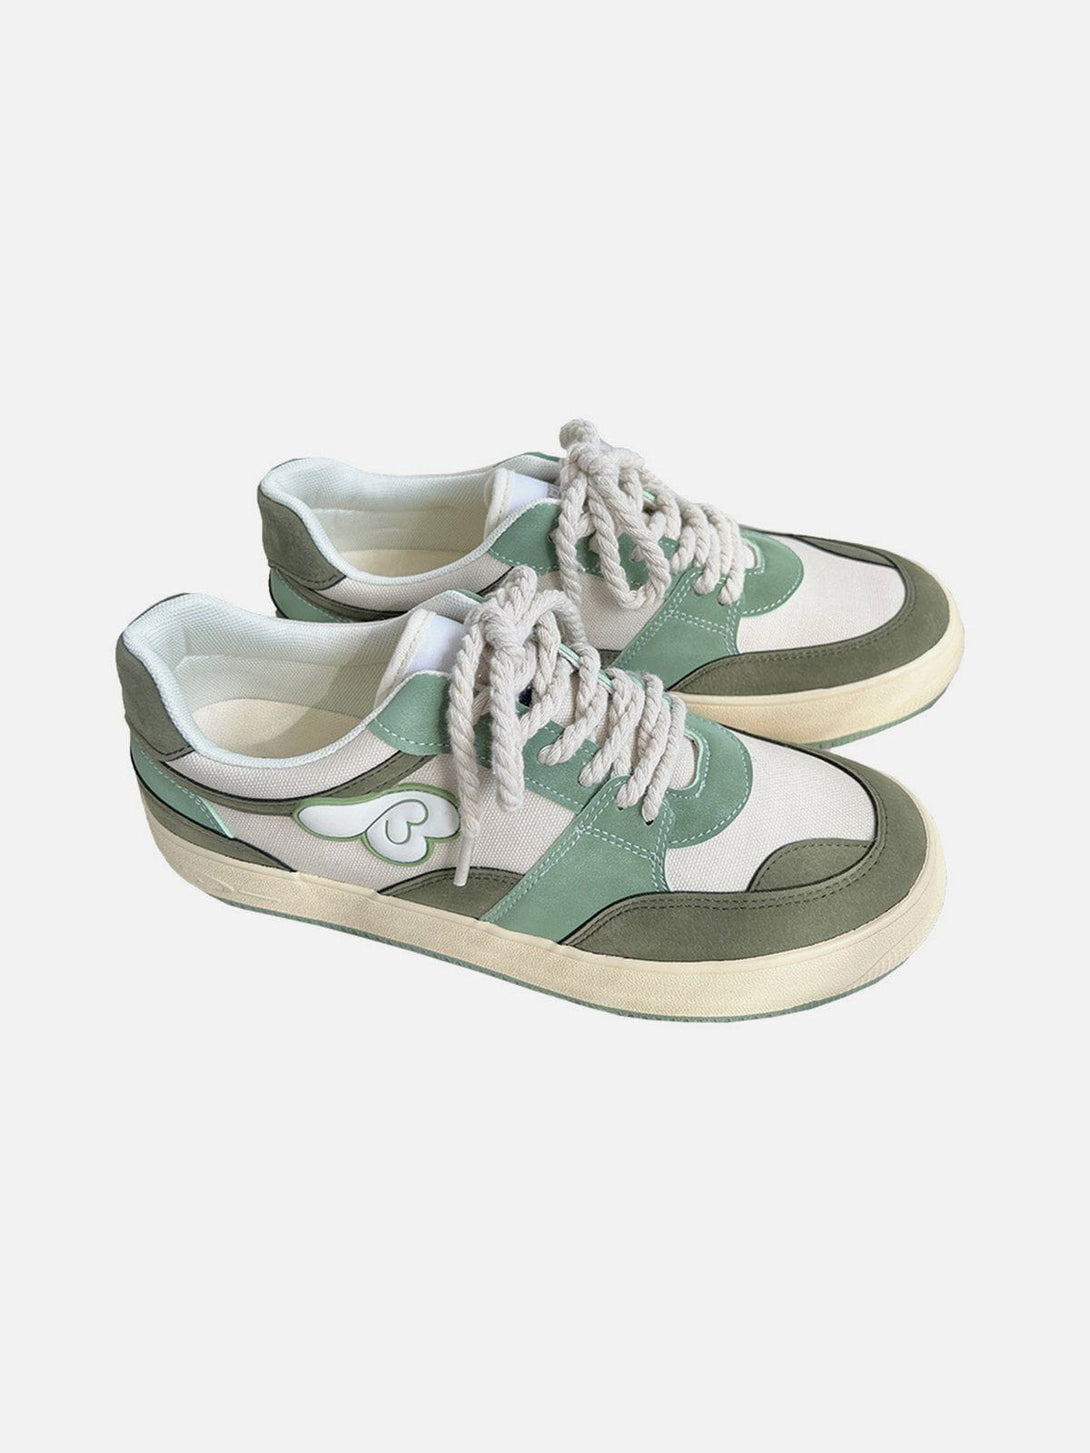 Majesda® - Colorblock Canvas Wings Graphic Casual Shoes- Outfit Ideas - Streetwear Fashion - majesda.com